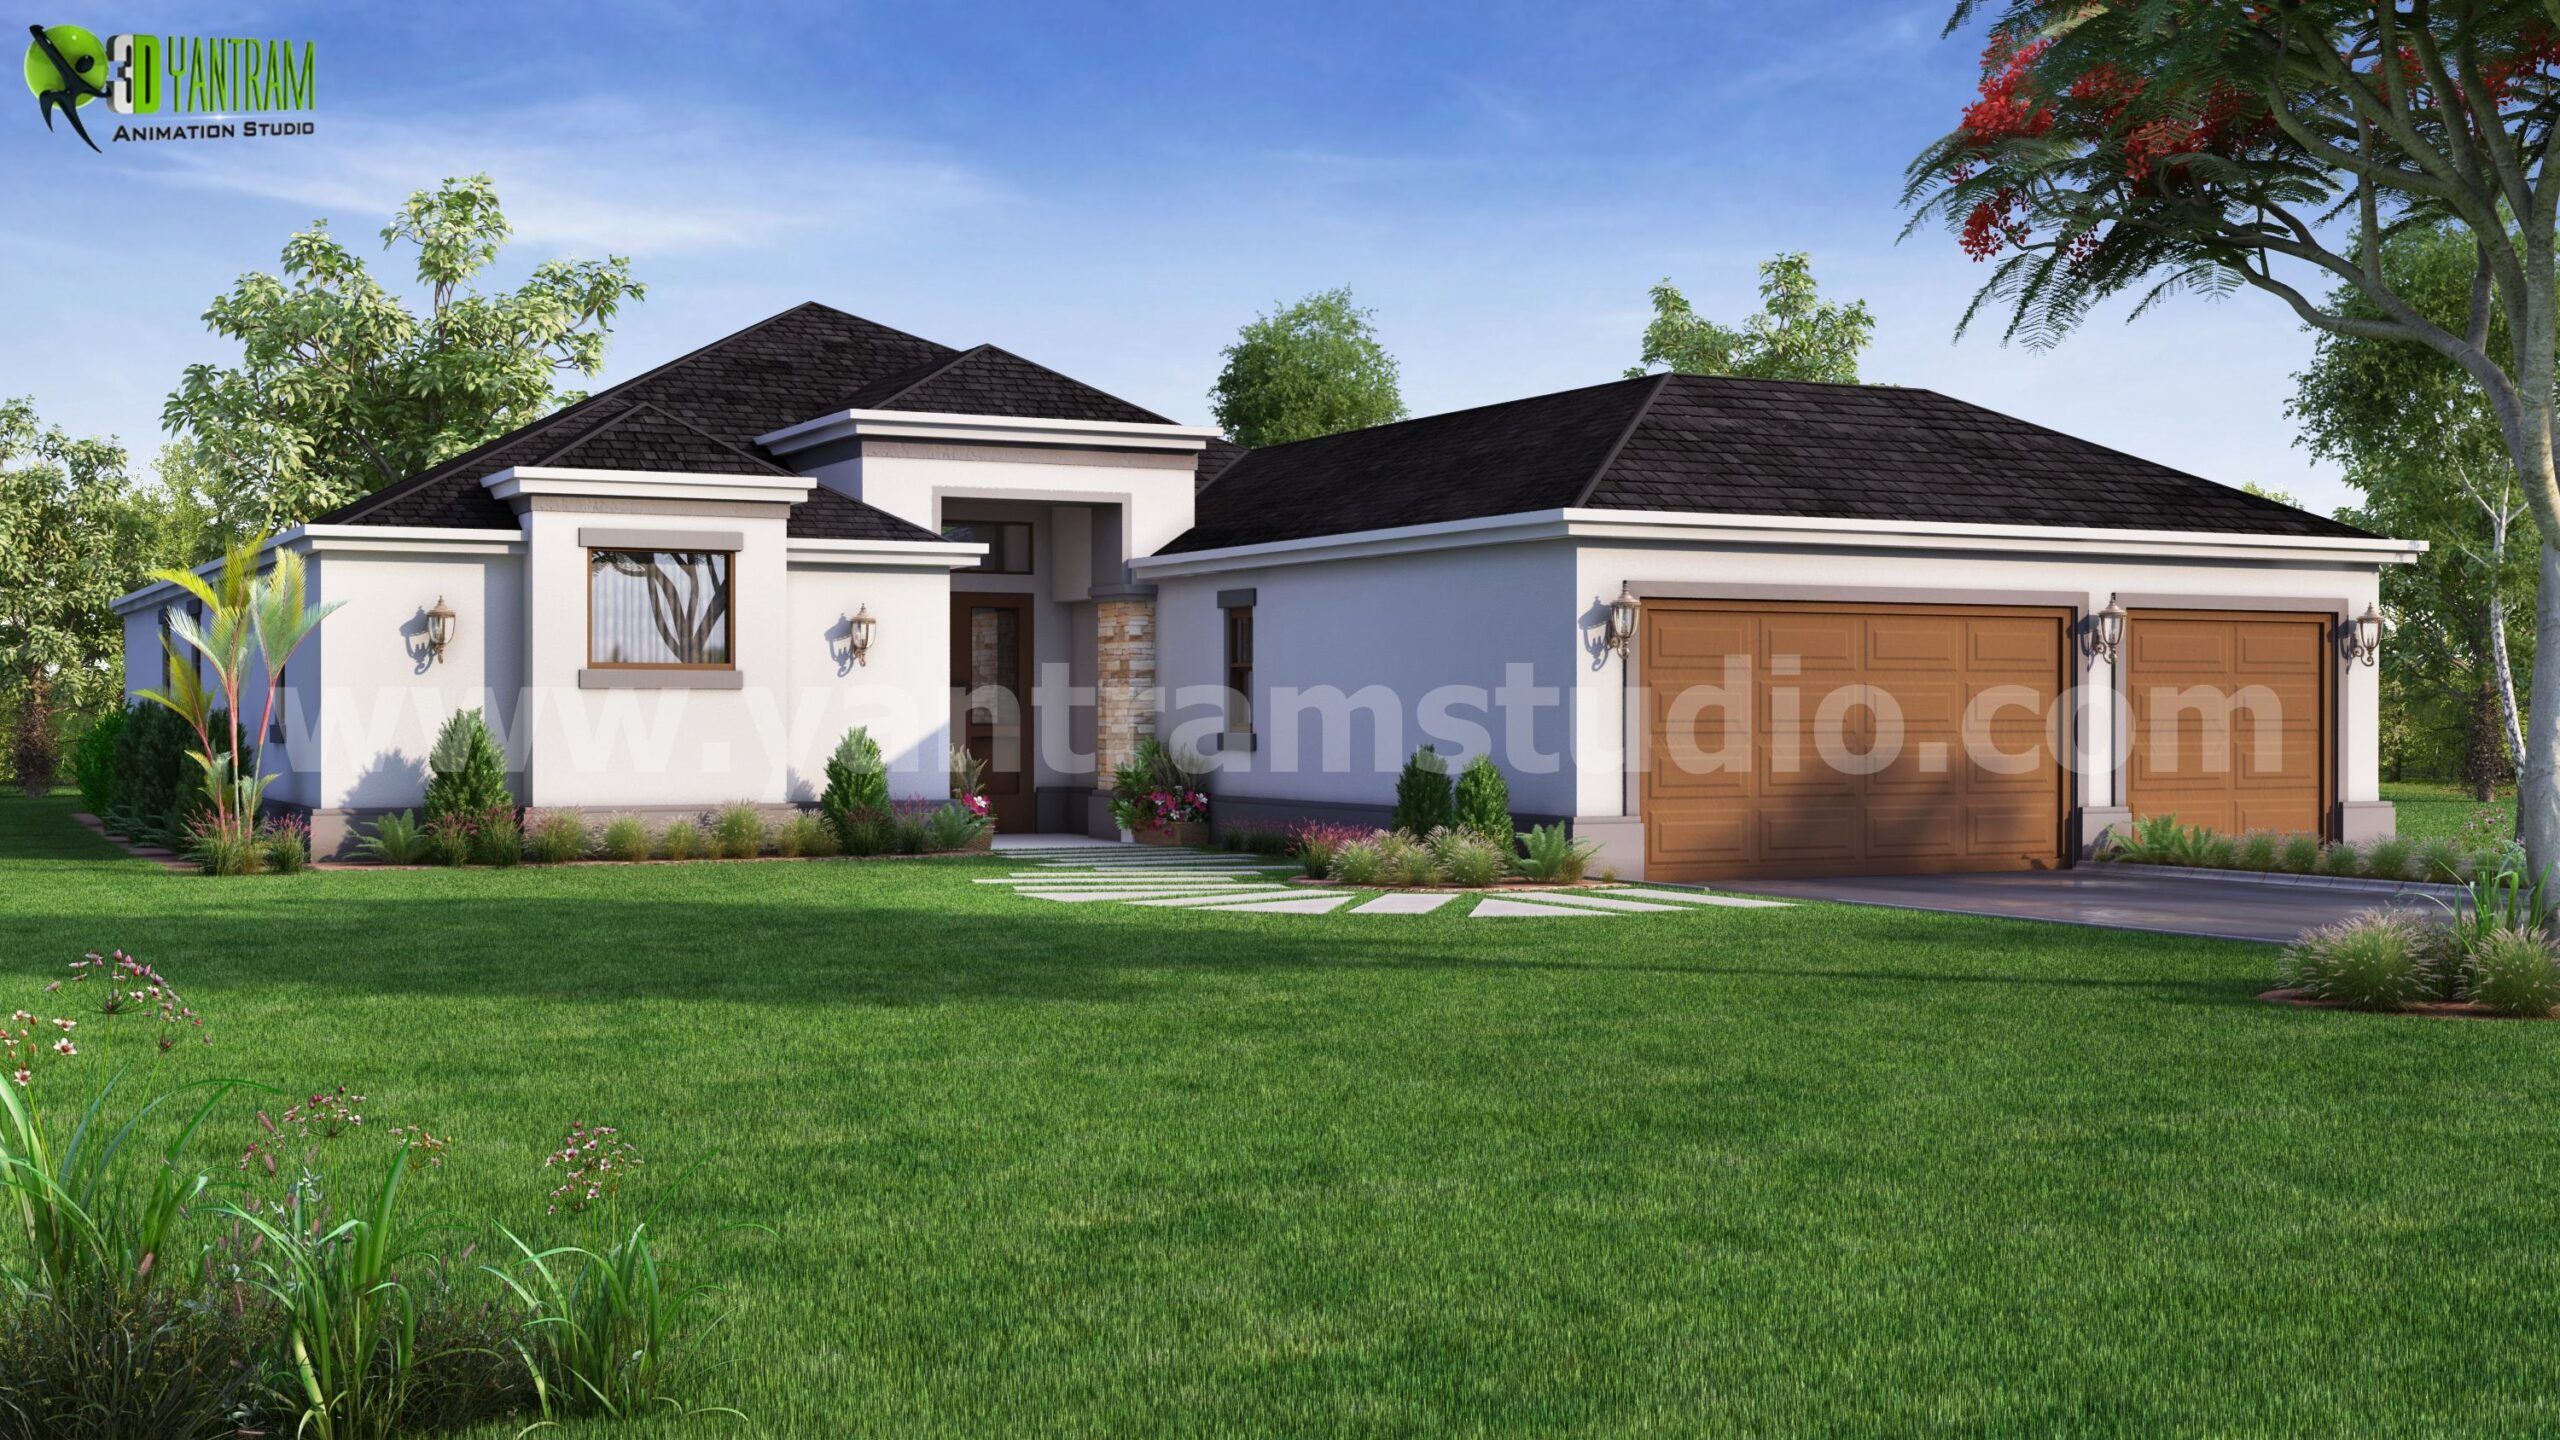 Awesome Exterior House Rendering by 3D Architectural rendering Design Studio – Florida, USA